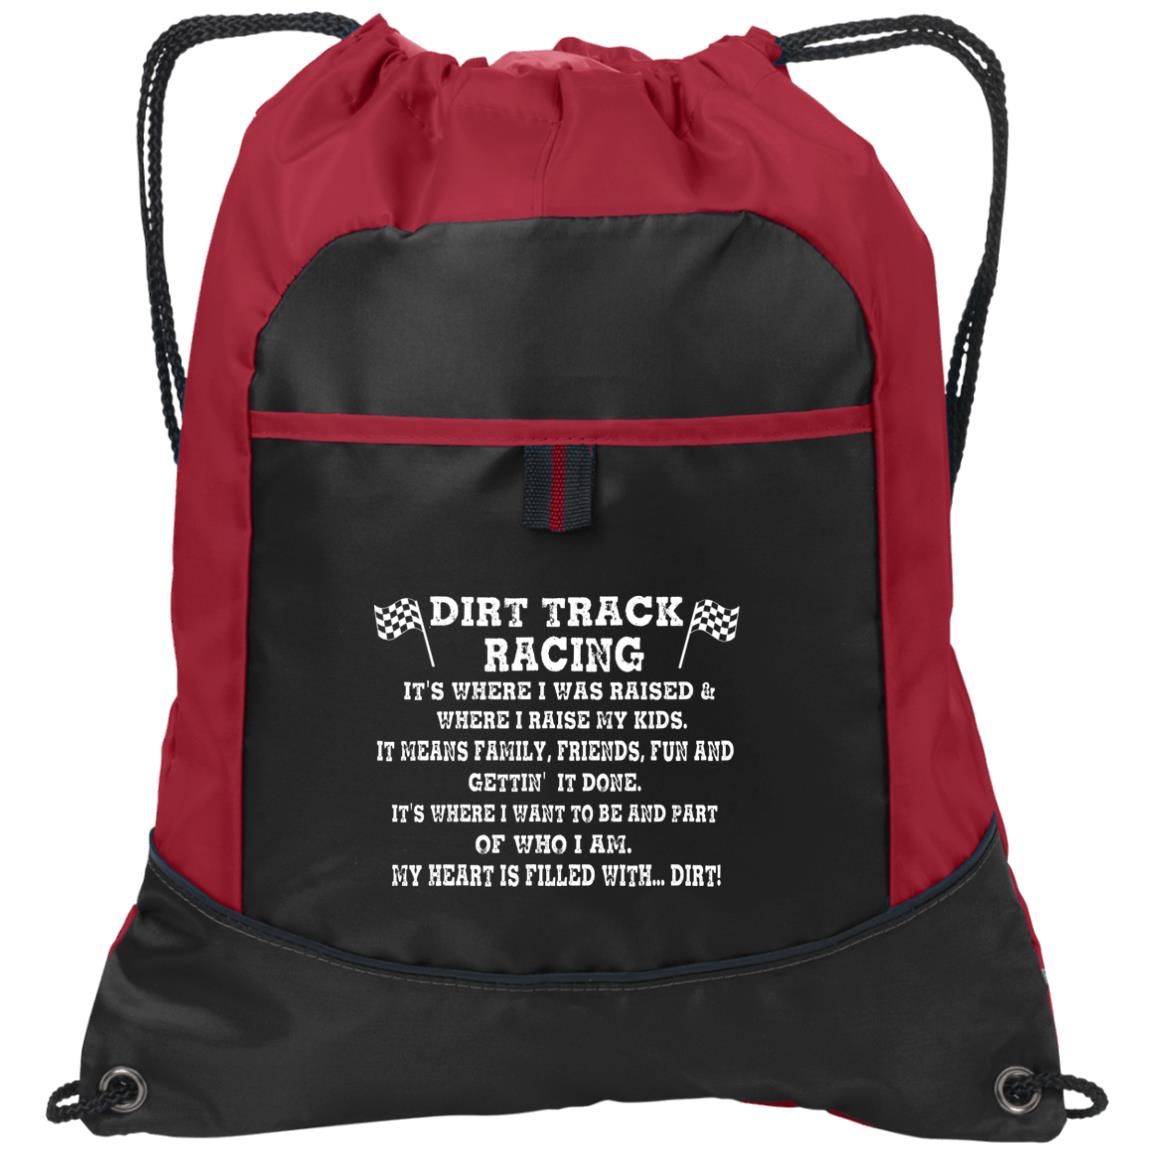 Dirt Track Racing It's Where I Was Raised Pocket Cinch Pack